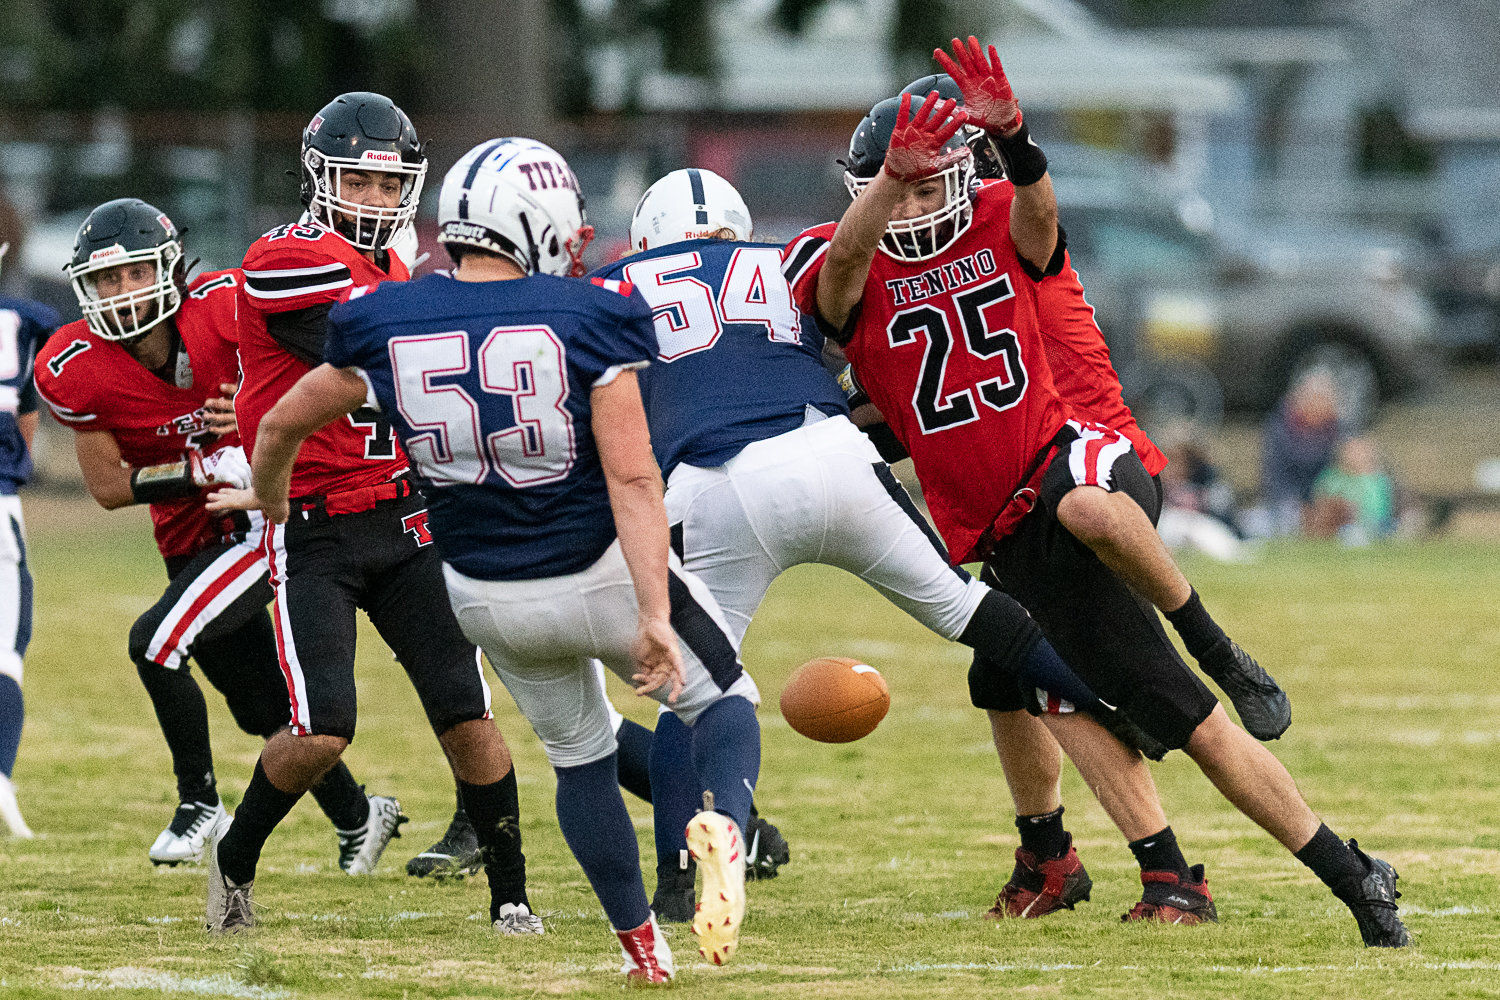 Tenino's Brody Noonan stretches to block a PWV punt Sept. 2 in Pe Ell.